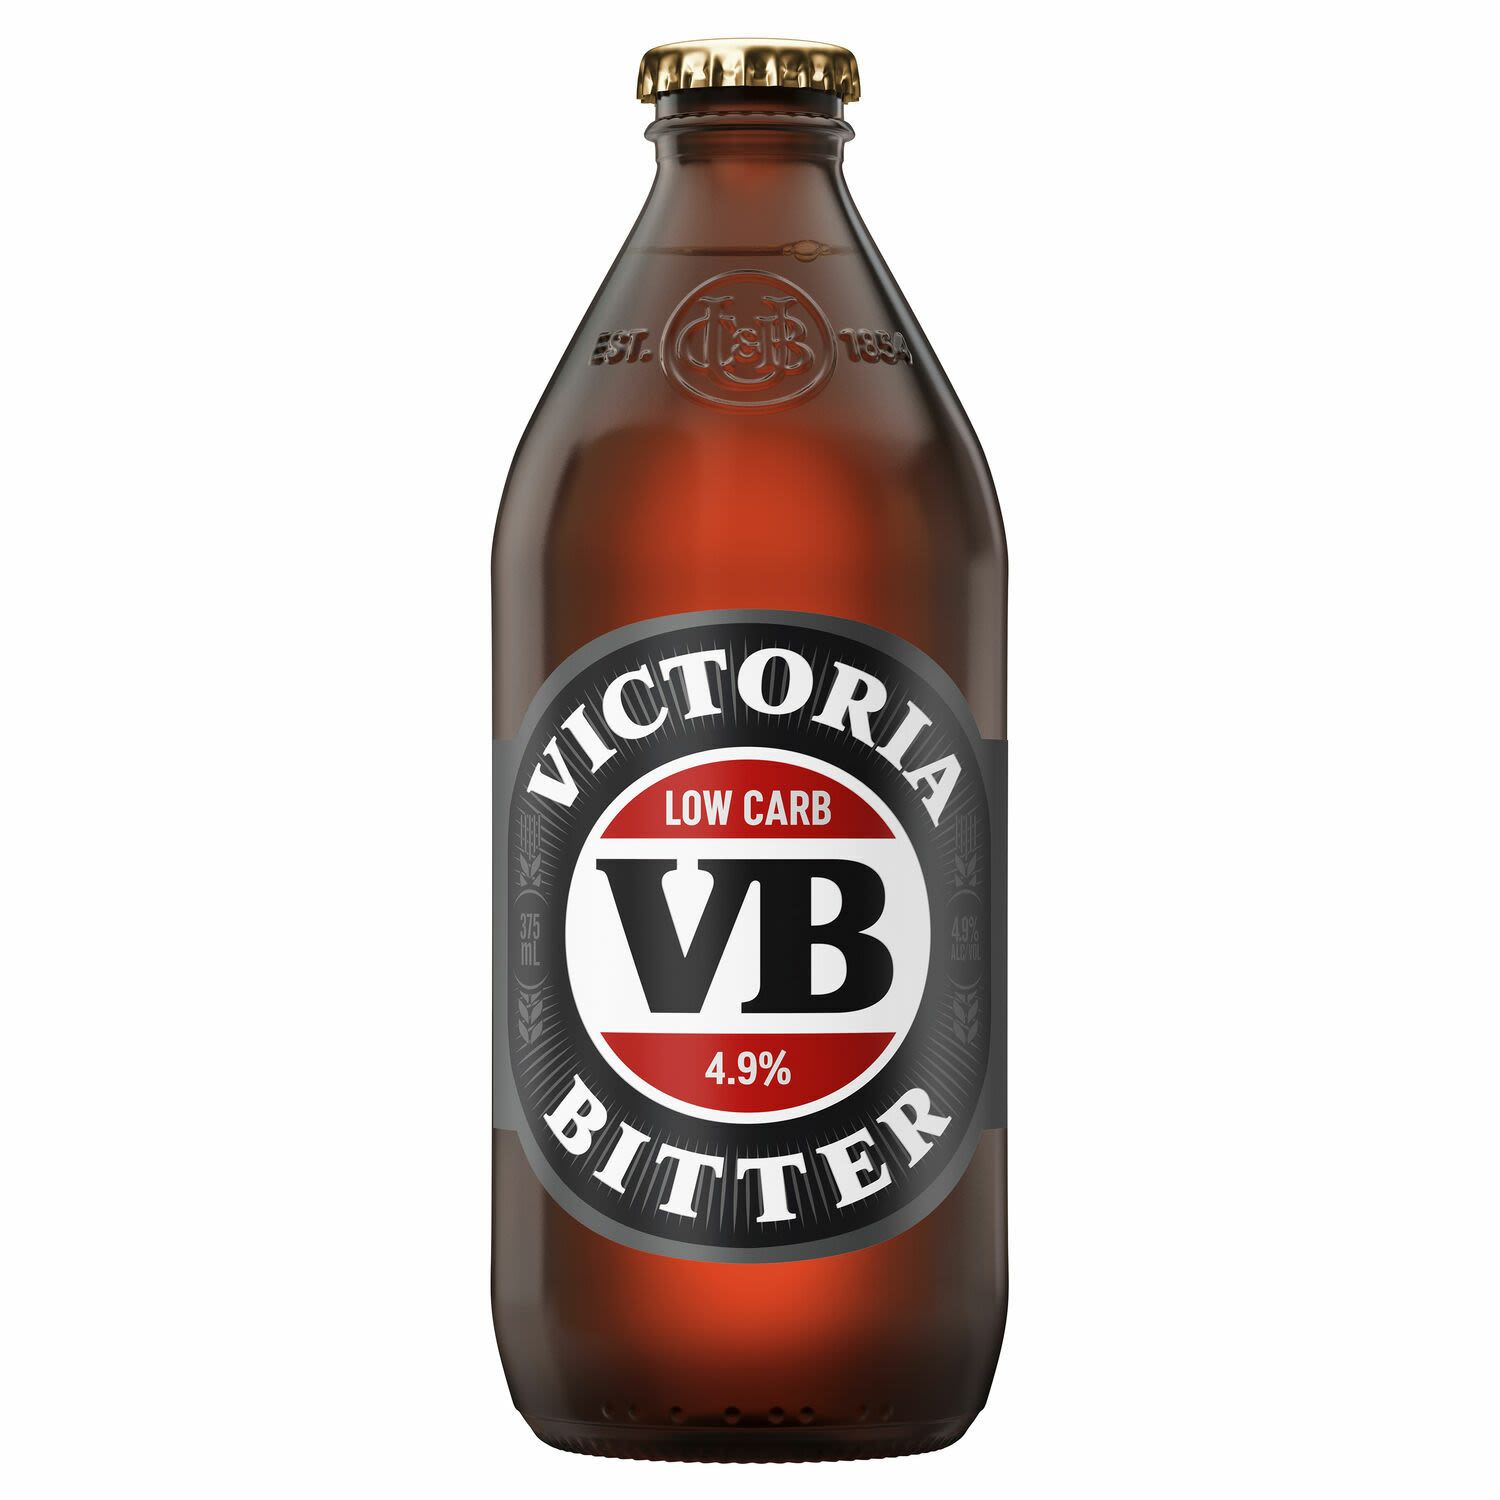 Victoria Bitter Low Carb Bottle 375mL